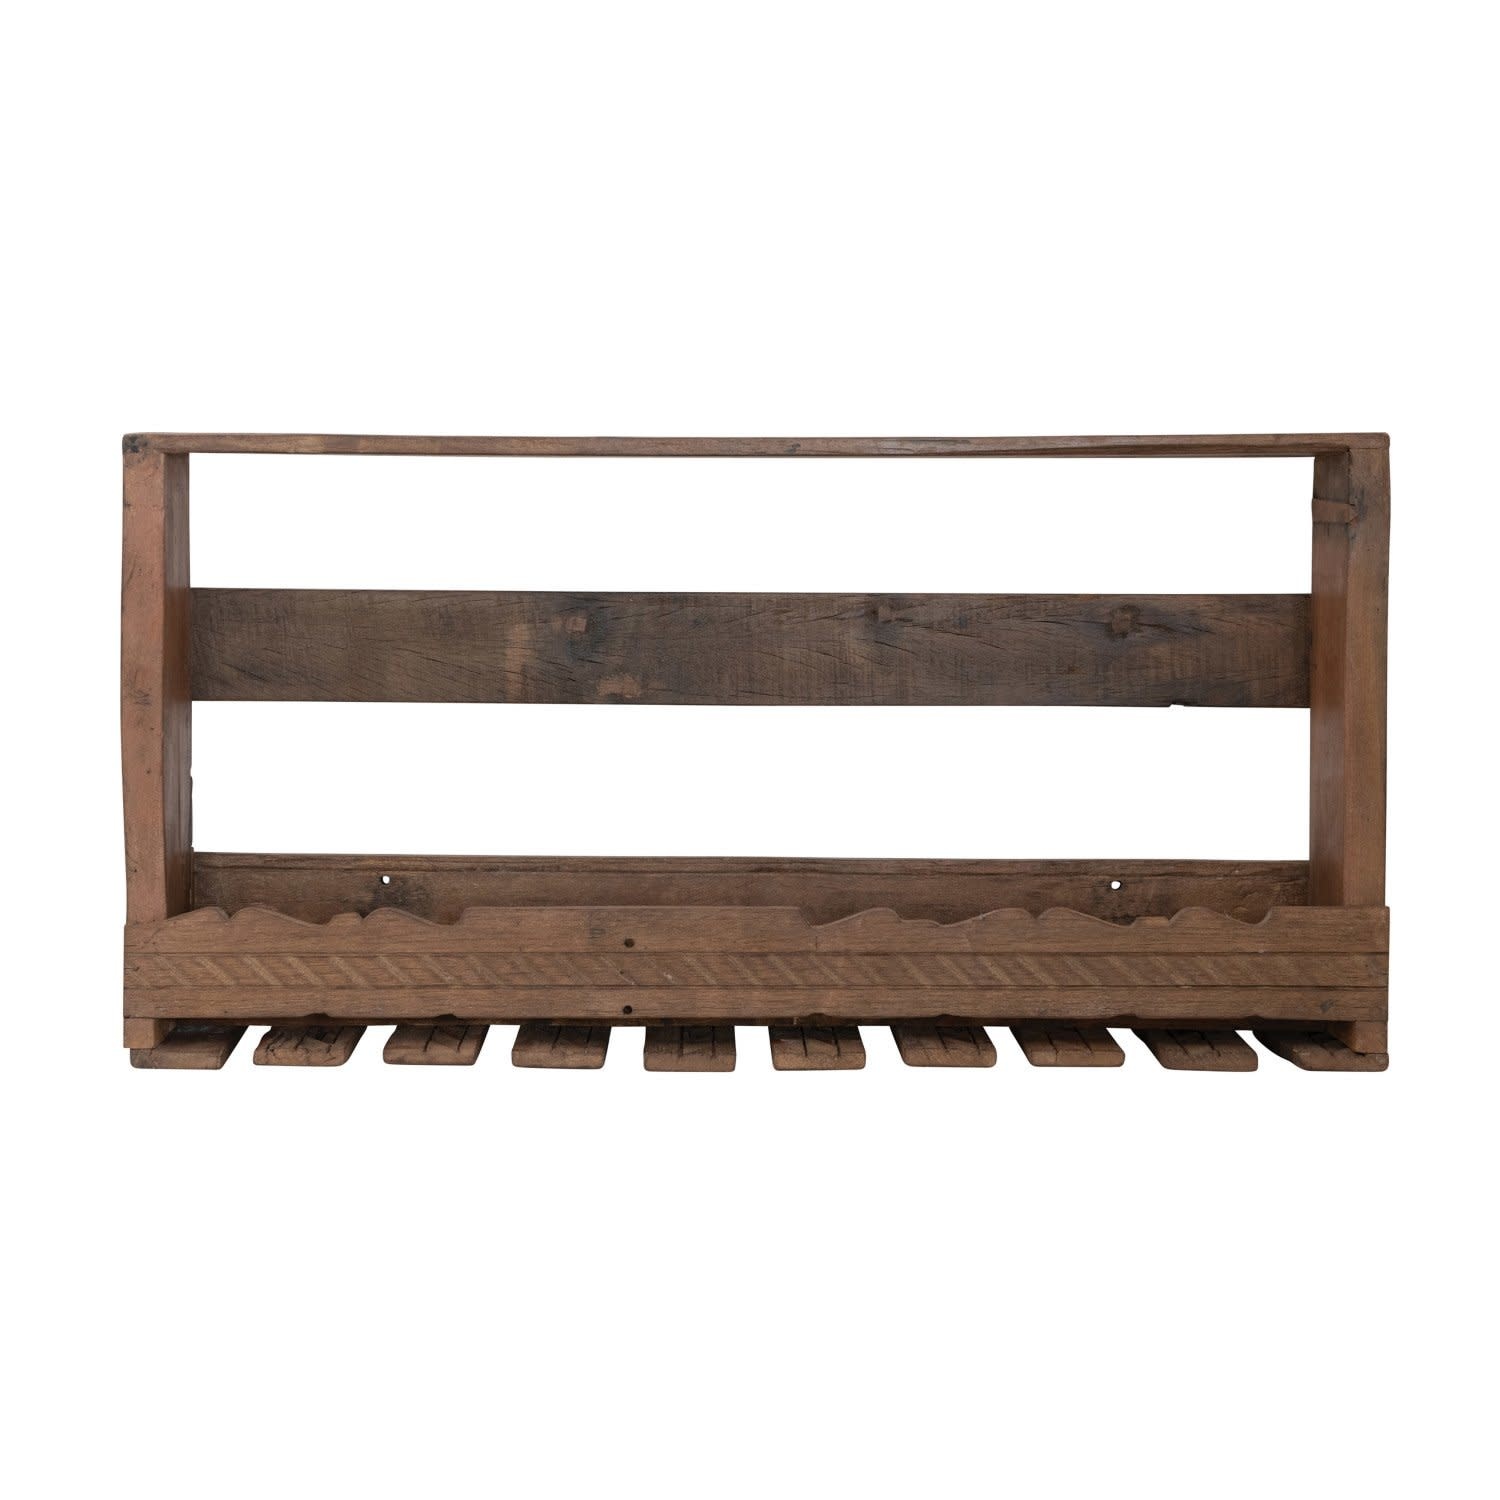 Reclaimed Wood Wine Glass Wall Rack w/ Shelf (Holds 9 Glasses), Available for local pick up